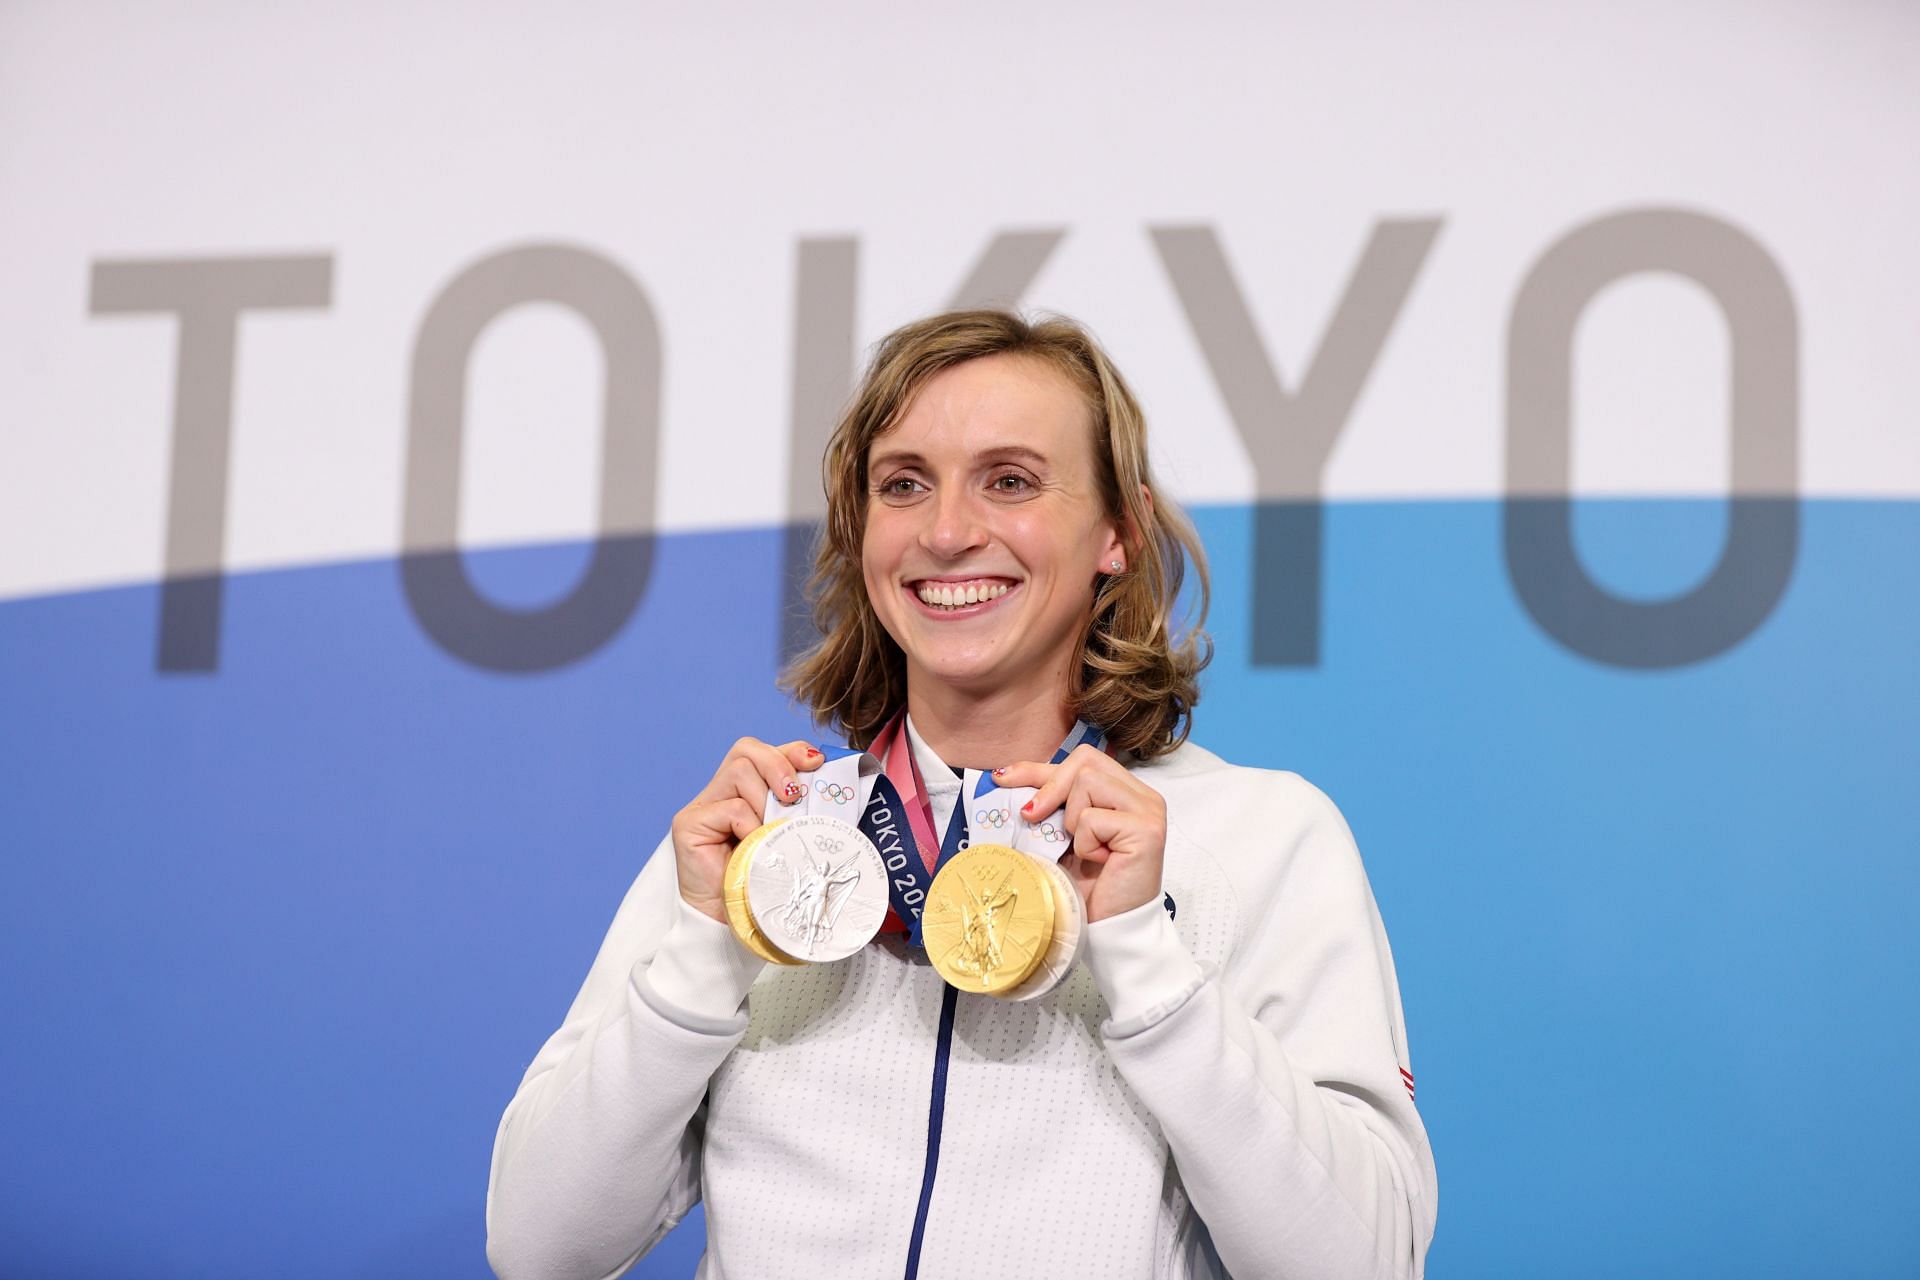 Katie Ledecky poses with her medals at the 2020 Tokyo Olympic Games. (Photo by Laurence Griffiths/Getty Images)